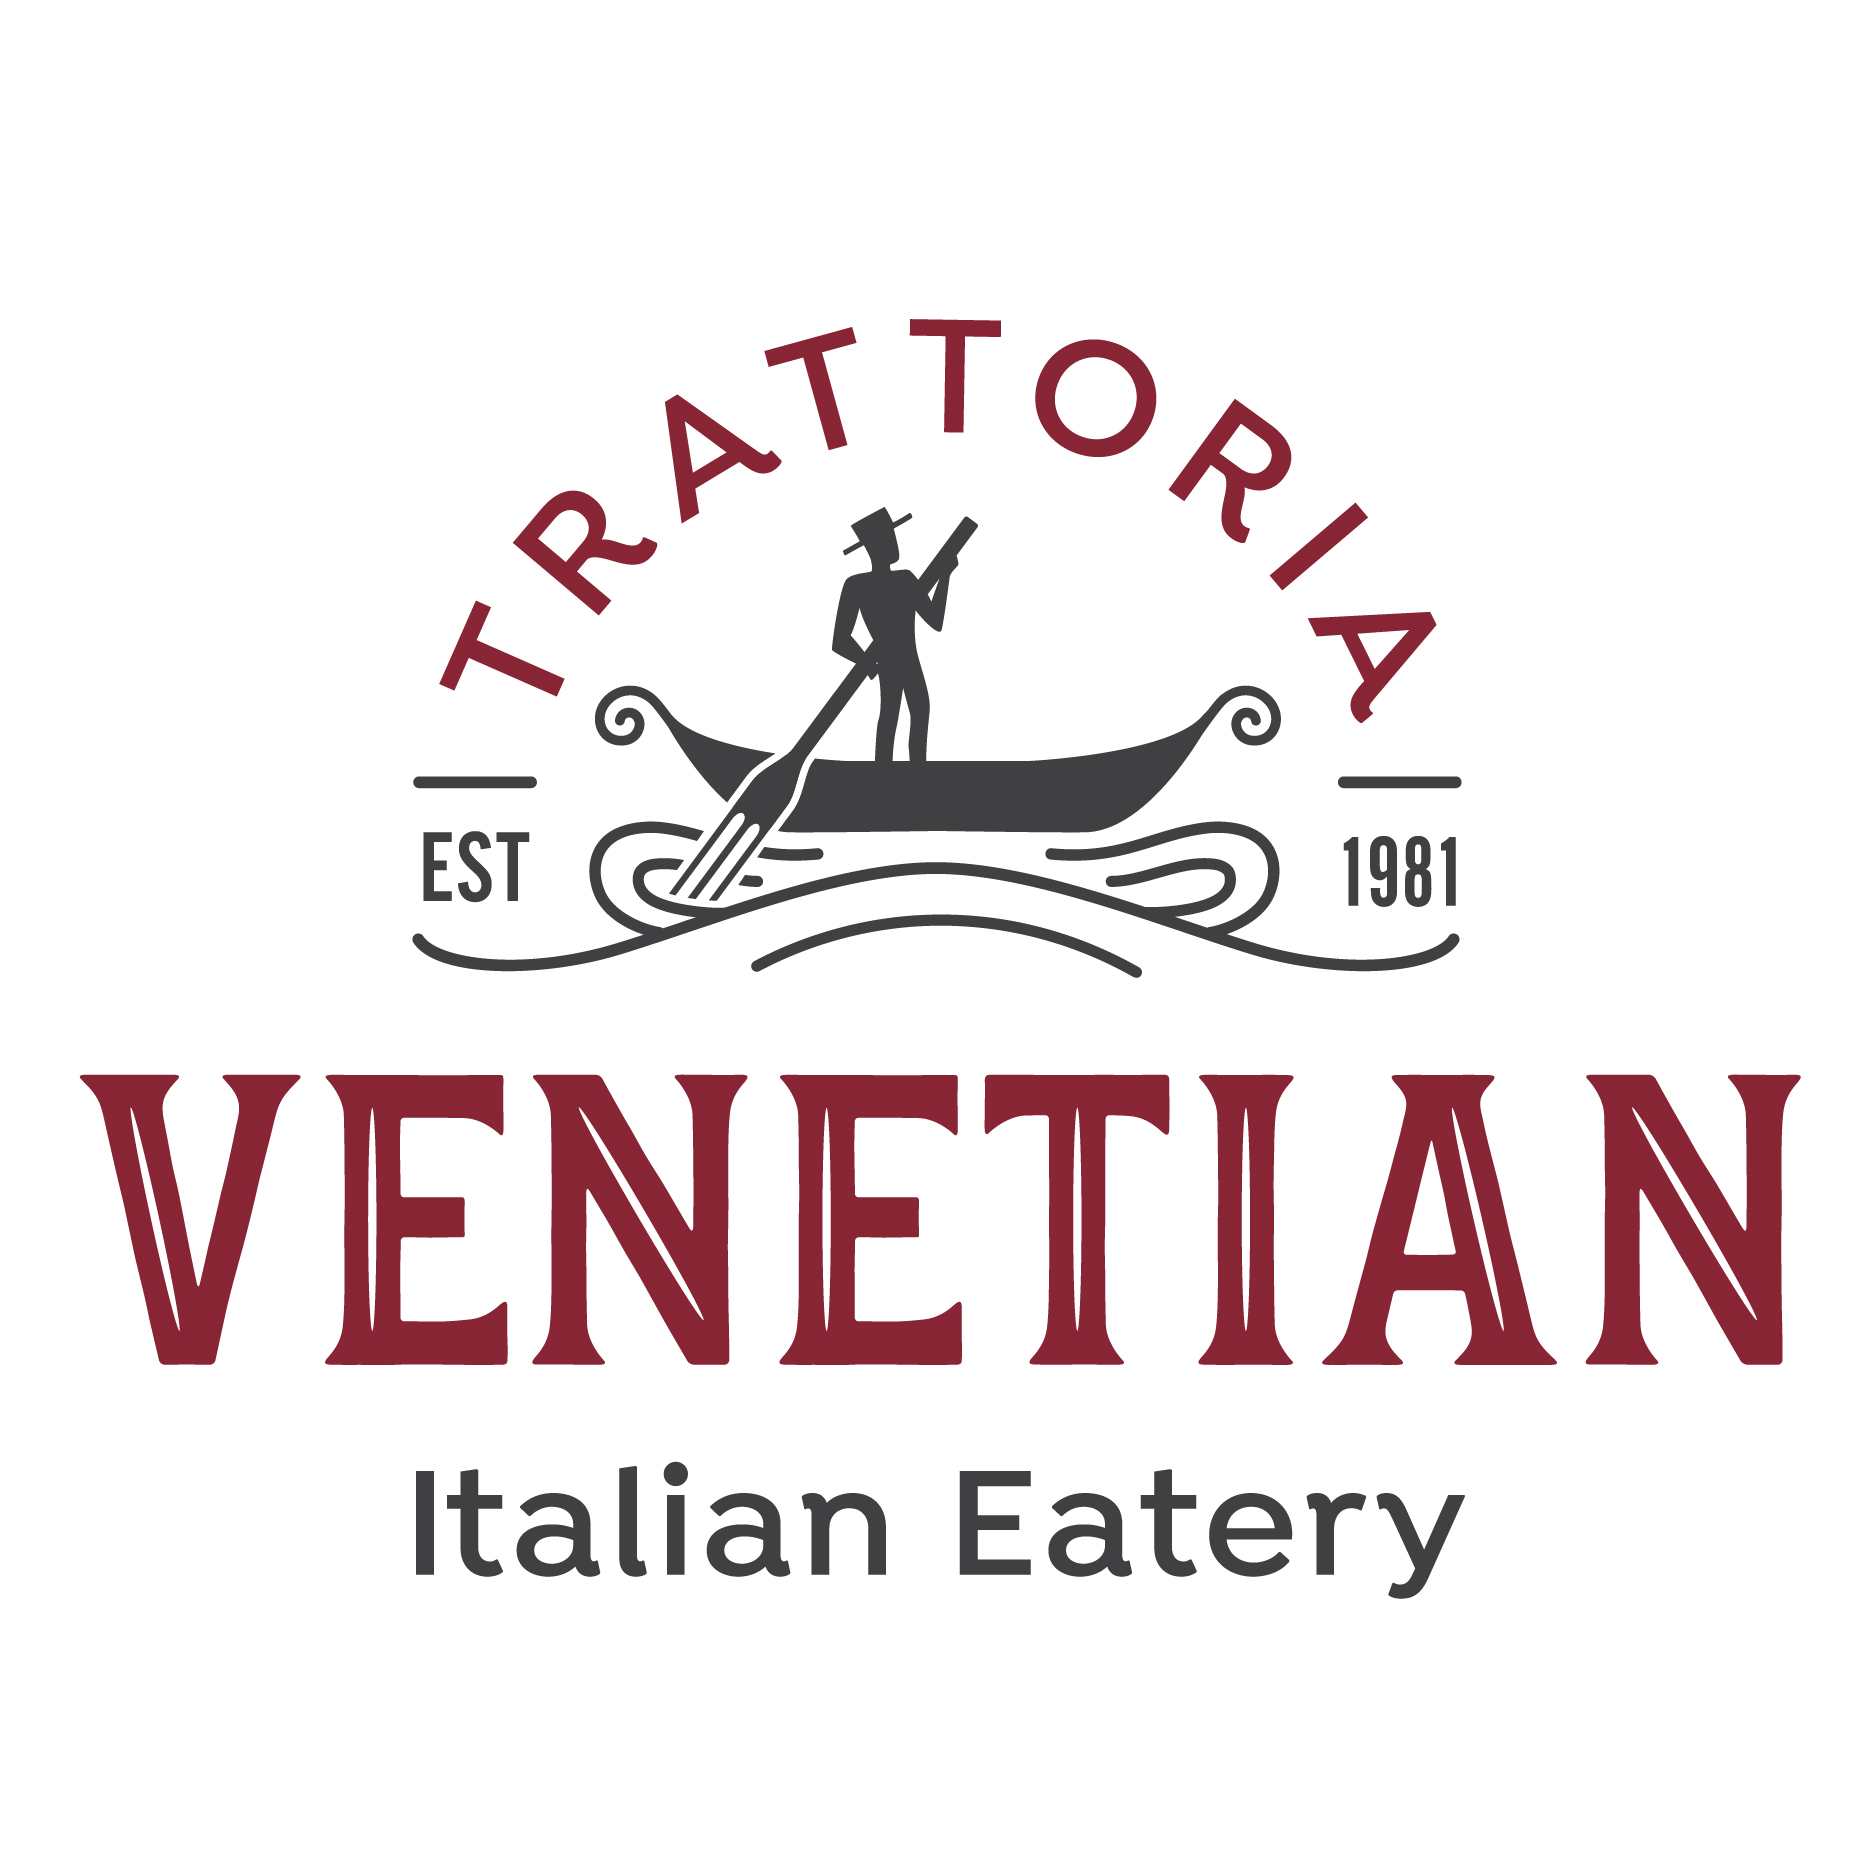 Venetian Italian Eatery logo design by logo designer Seth Design Group for your inspiration and for the worlds largest logo competition